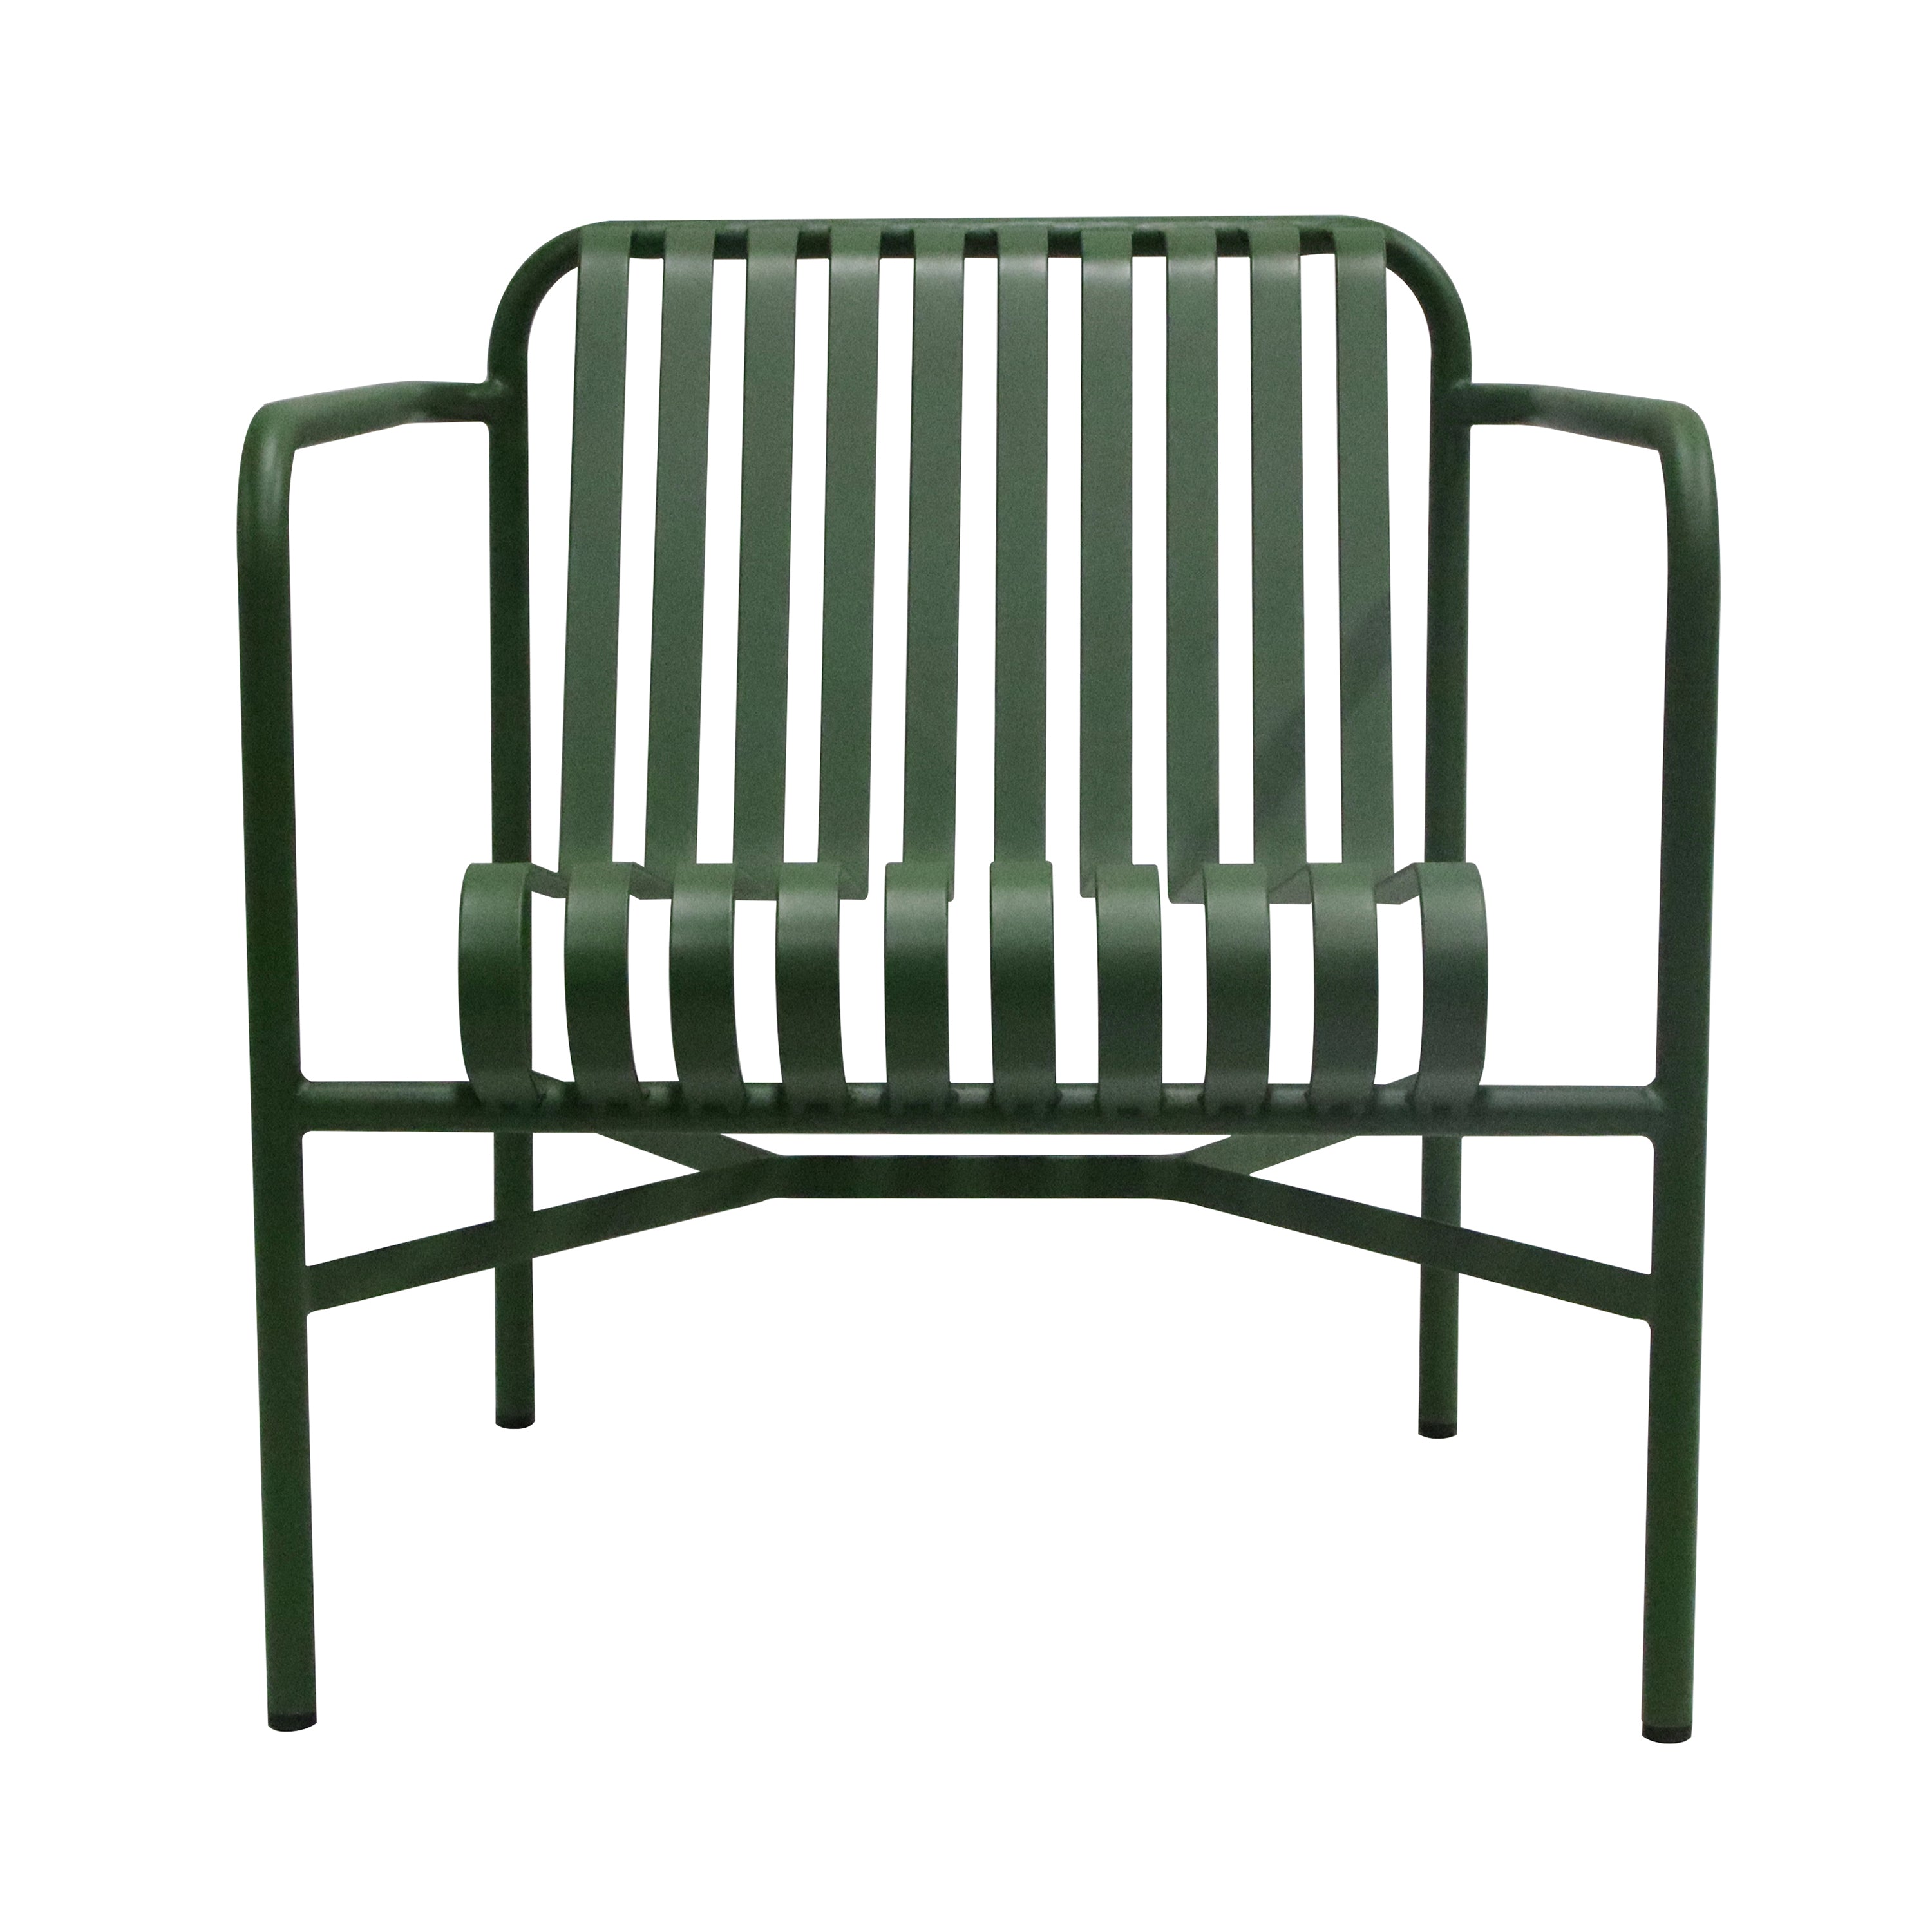 Euro Style Outdoor Chairs - Enid Outdoor Lounge Chair in Dark Green - Set of 1